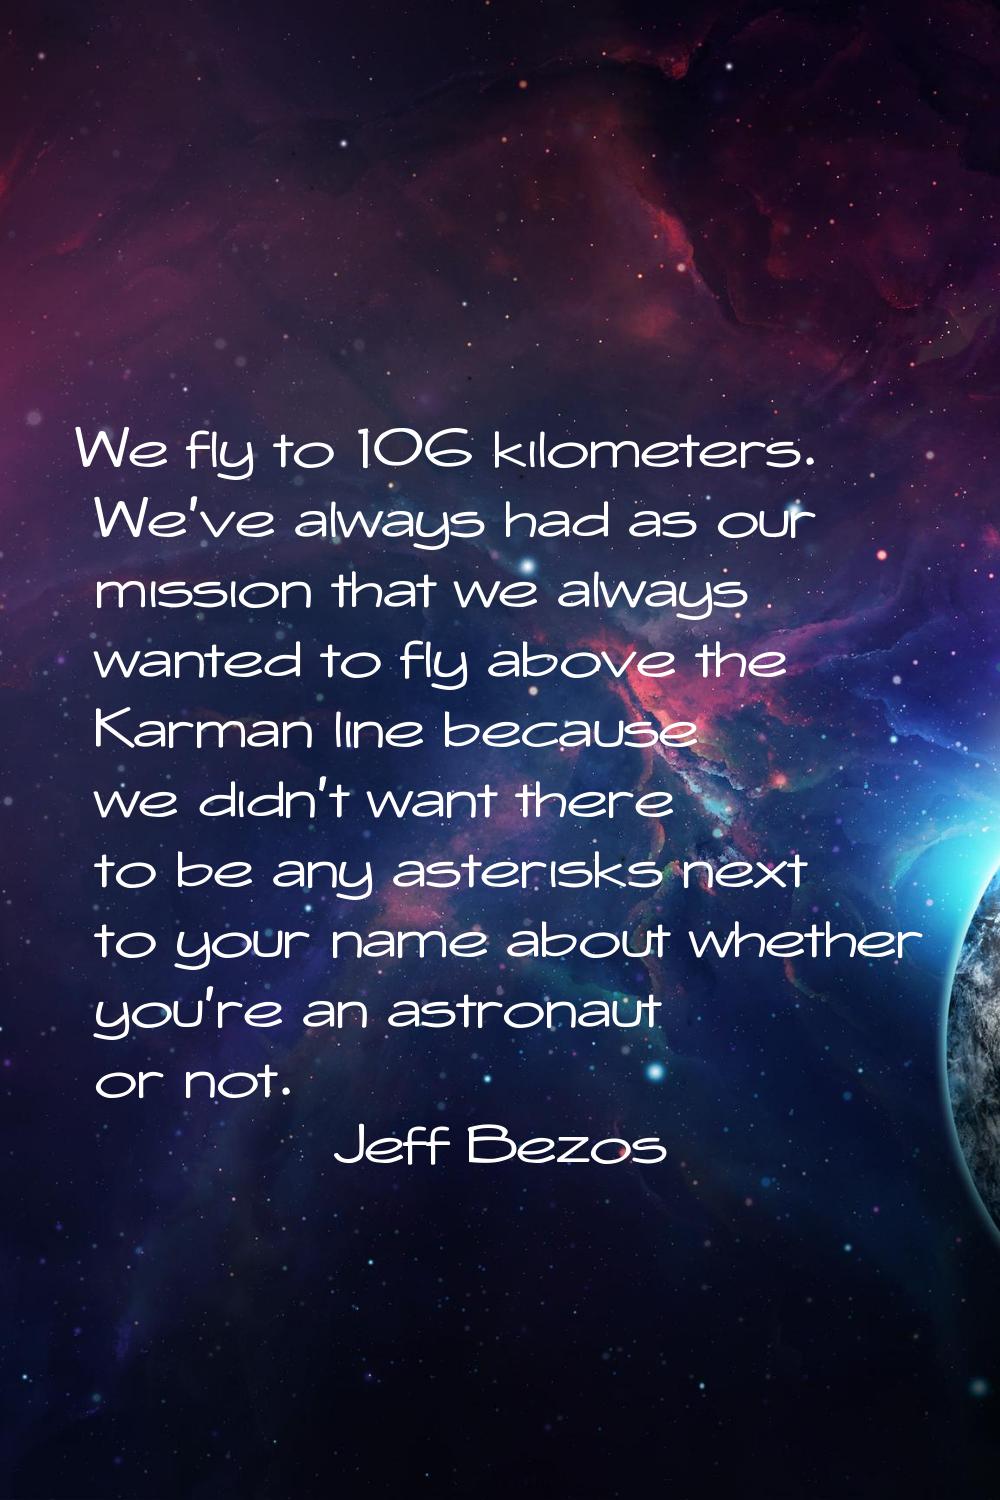 We fly to 106 kilometers. We've always had as our mission that we always wanted to fly above the Ka